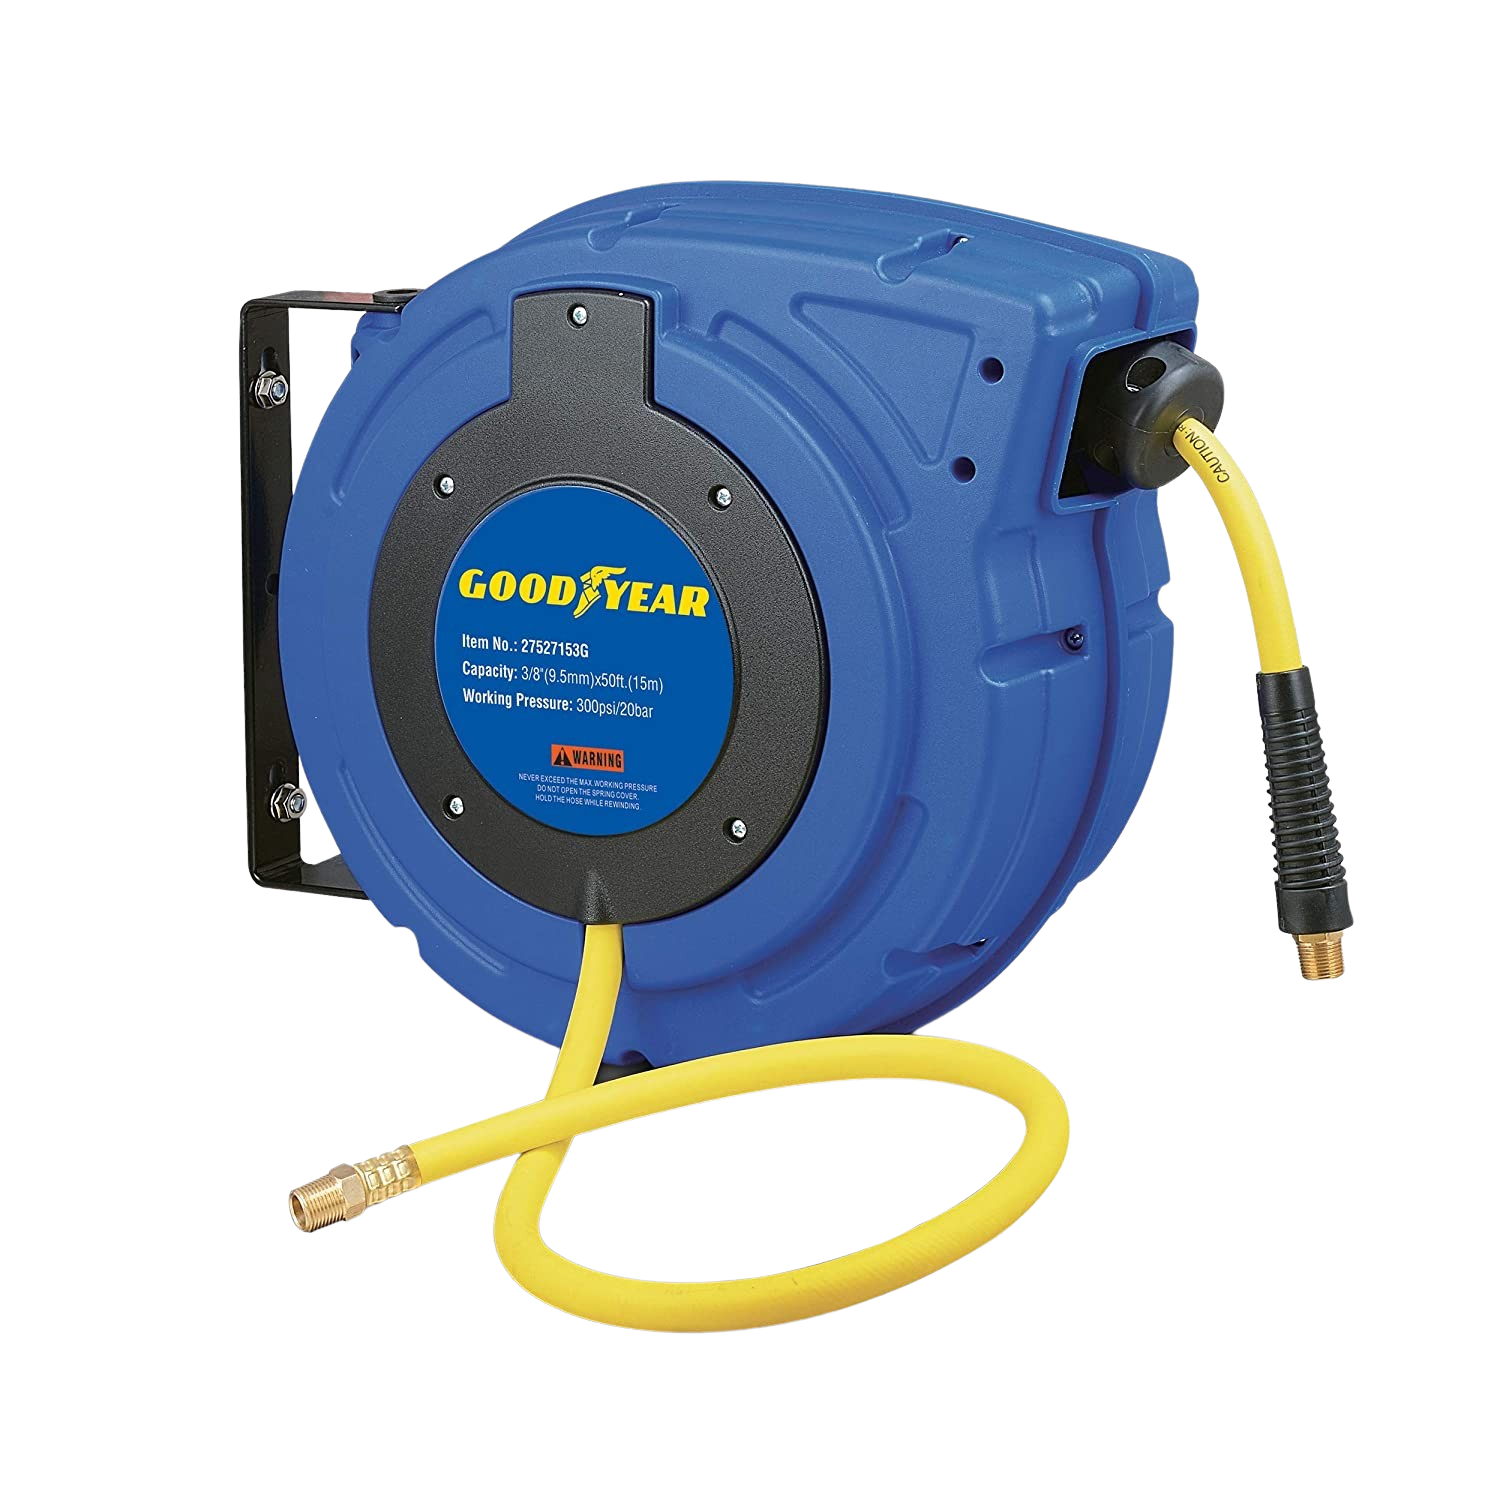 Ironton Compact Air Hose Reel, With 3/8in. x 50ft. Hybrid Polymer Hose,  Max. 300 PSI